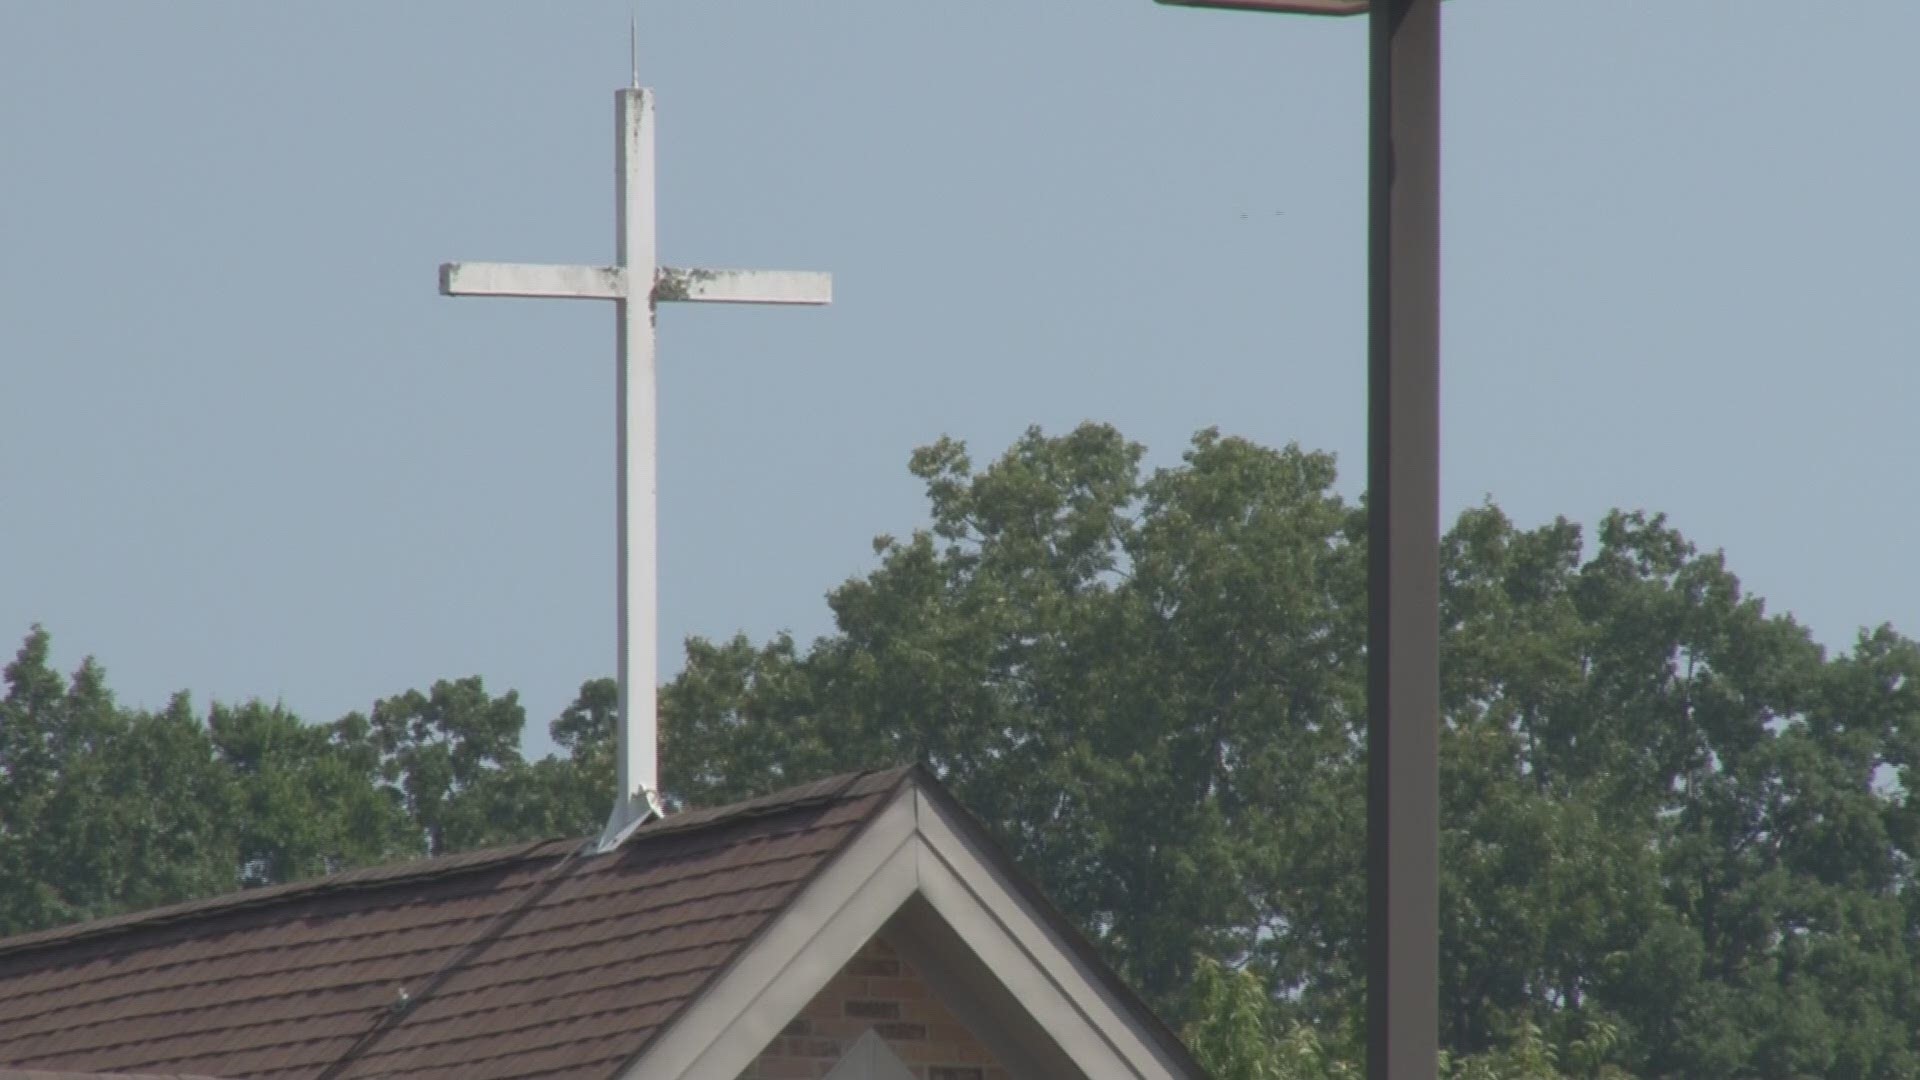 Some Methodist churches will stay empty, at least through the end of July, due to COVID-19.